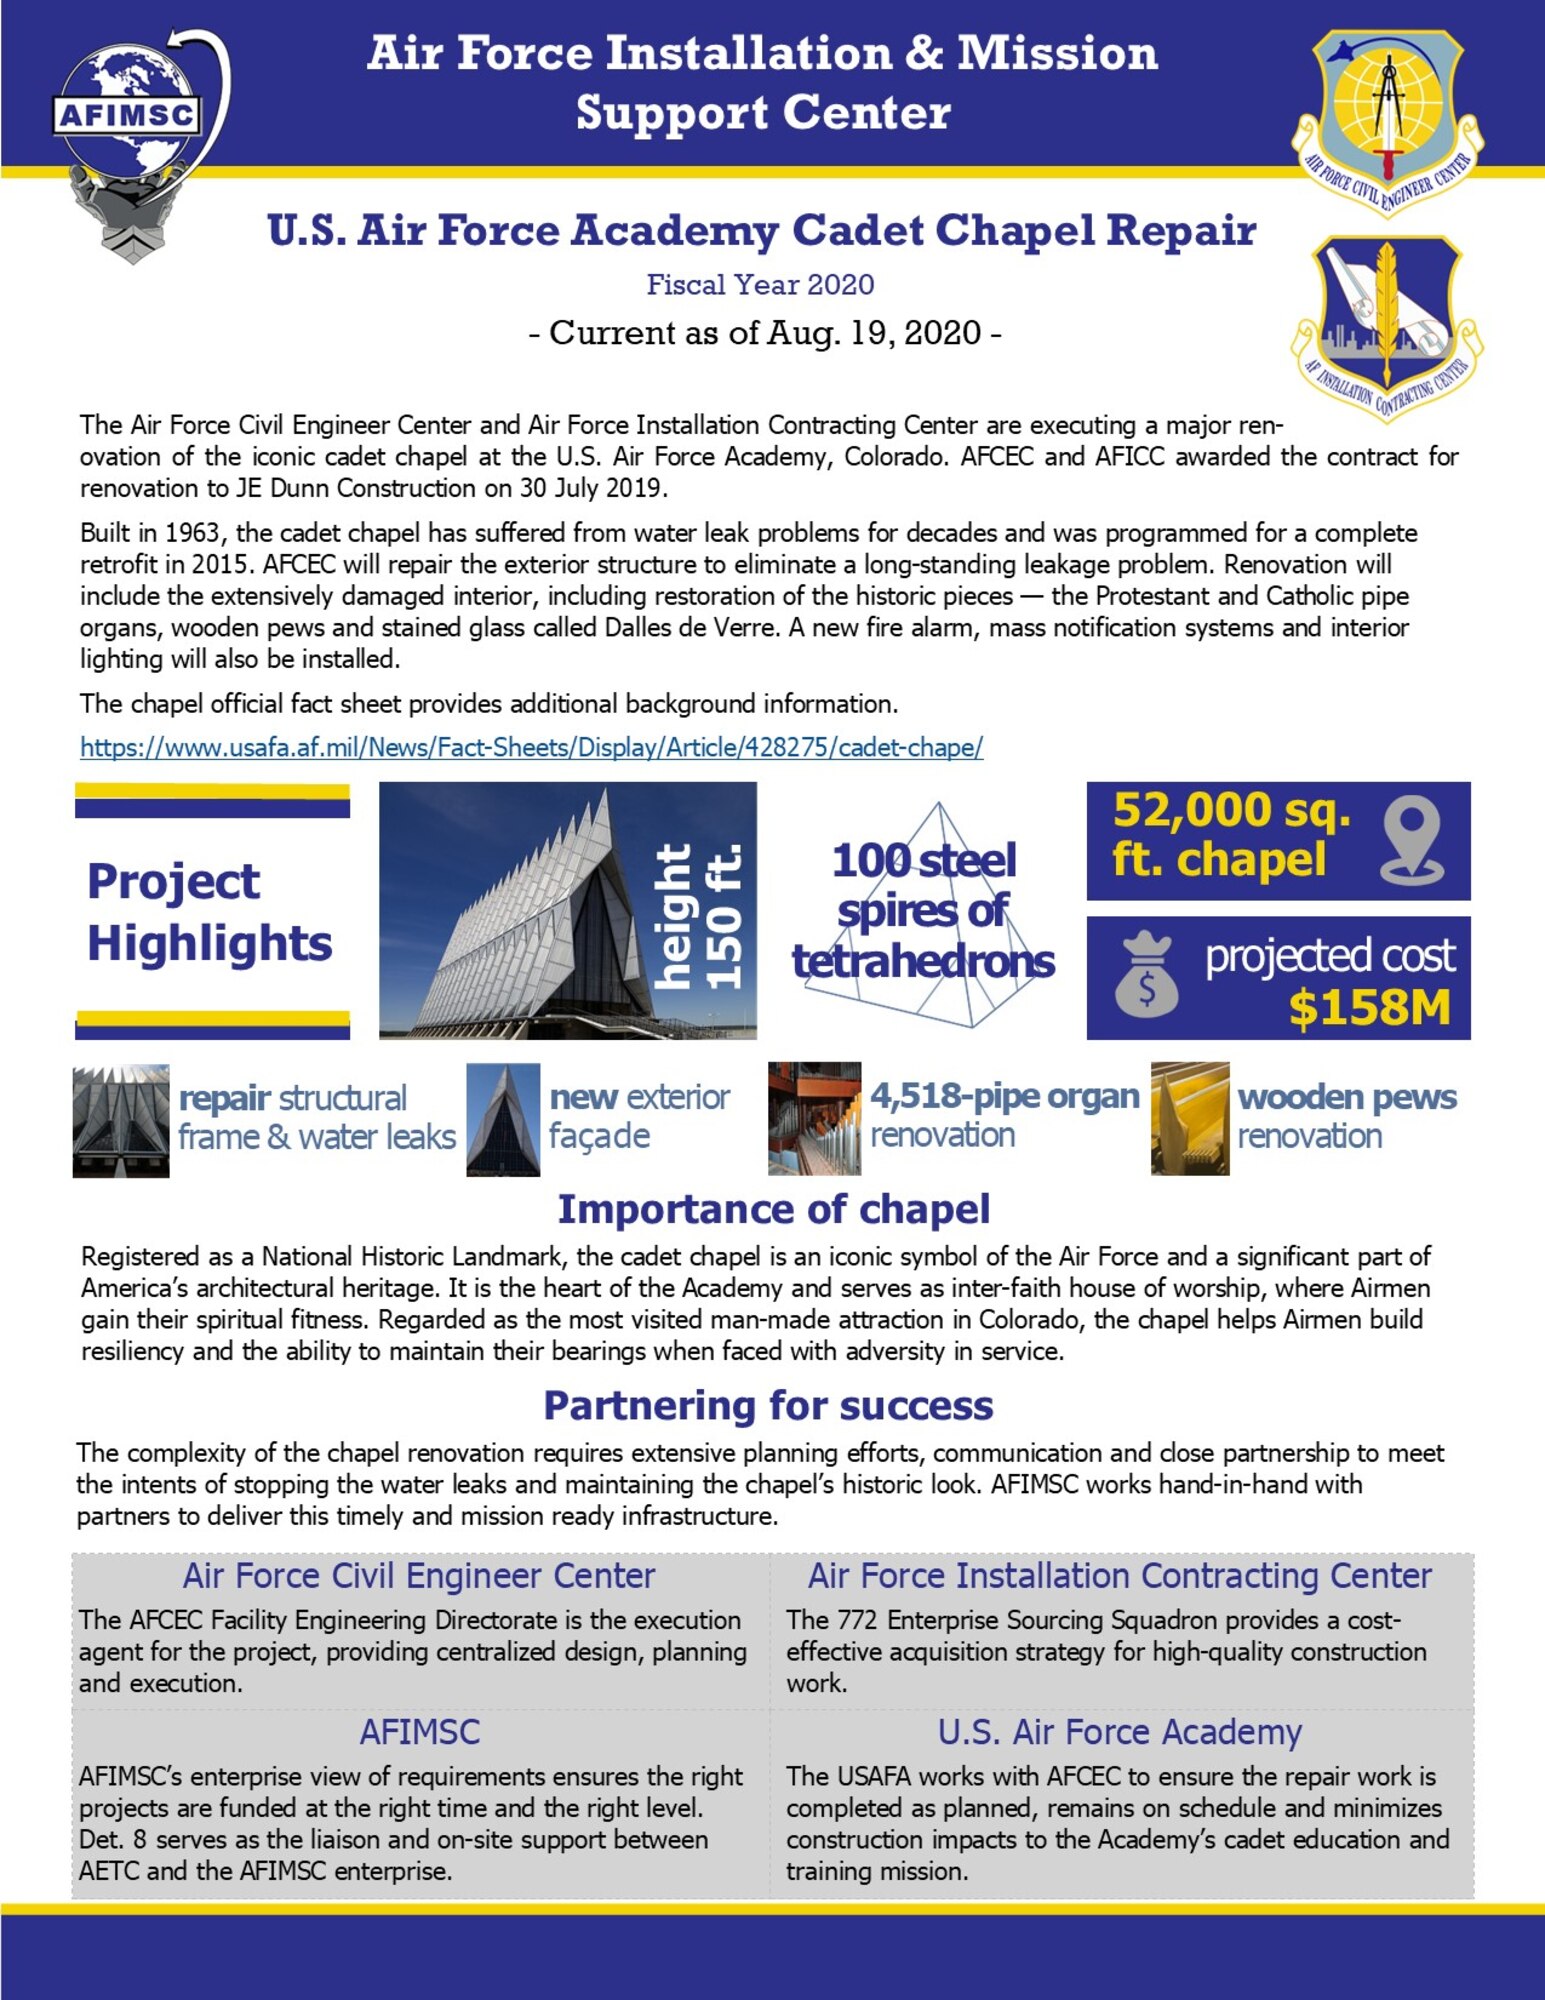 This snapshot details the major renovation of the iconic Cadet Chapel at the U.S. Air Force Academy.